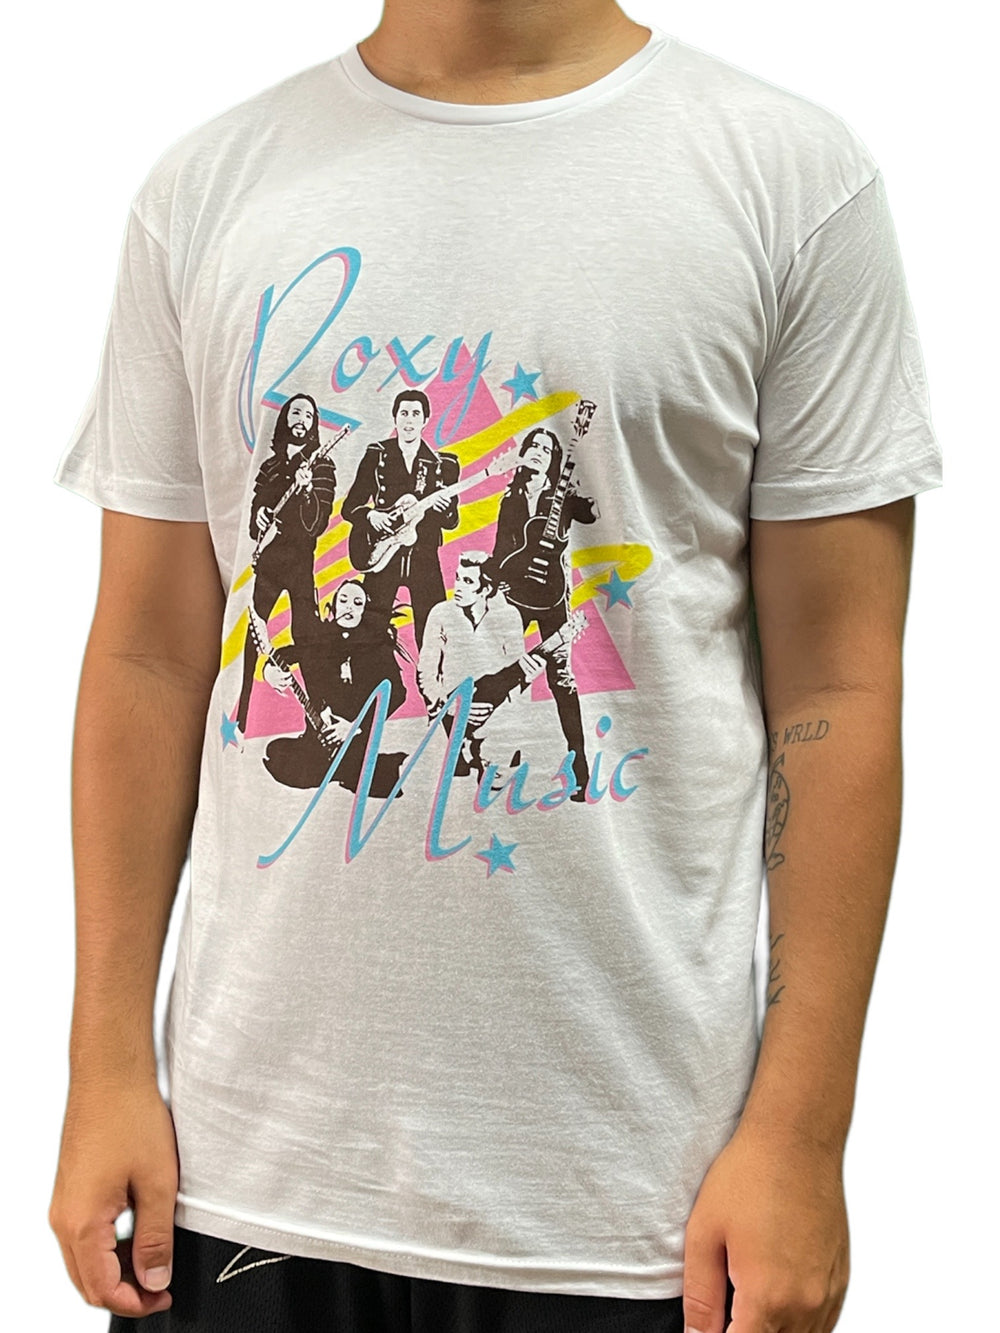 Roxy Music Guitars Unisex Official T Shirt Brand New Various Sizes